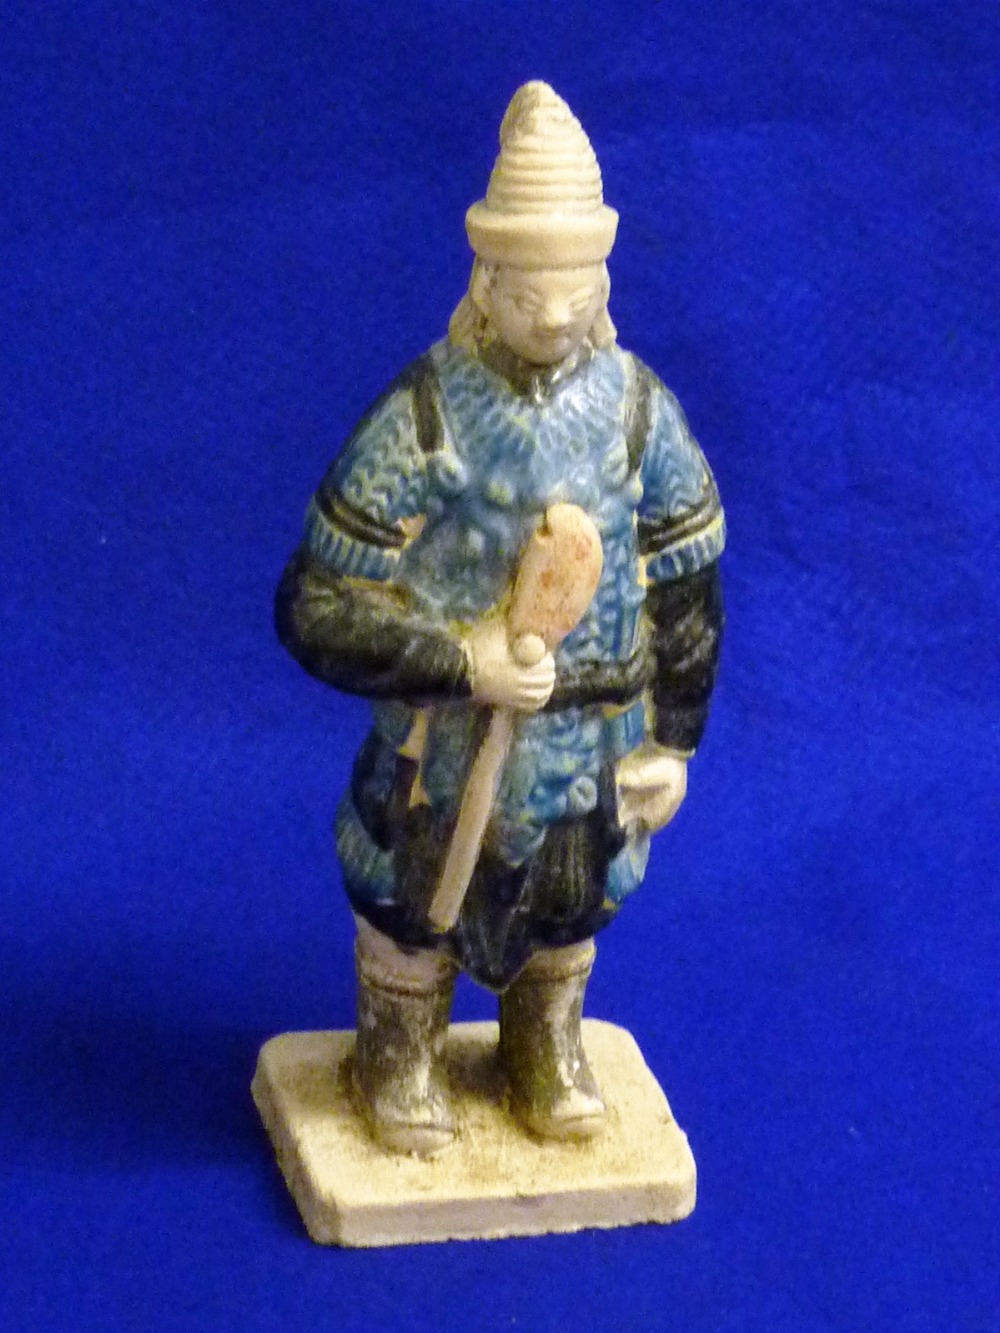 Ming Dynasty (1368-1644) a Chinese potte